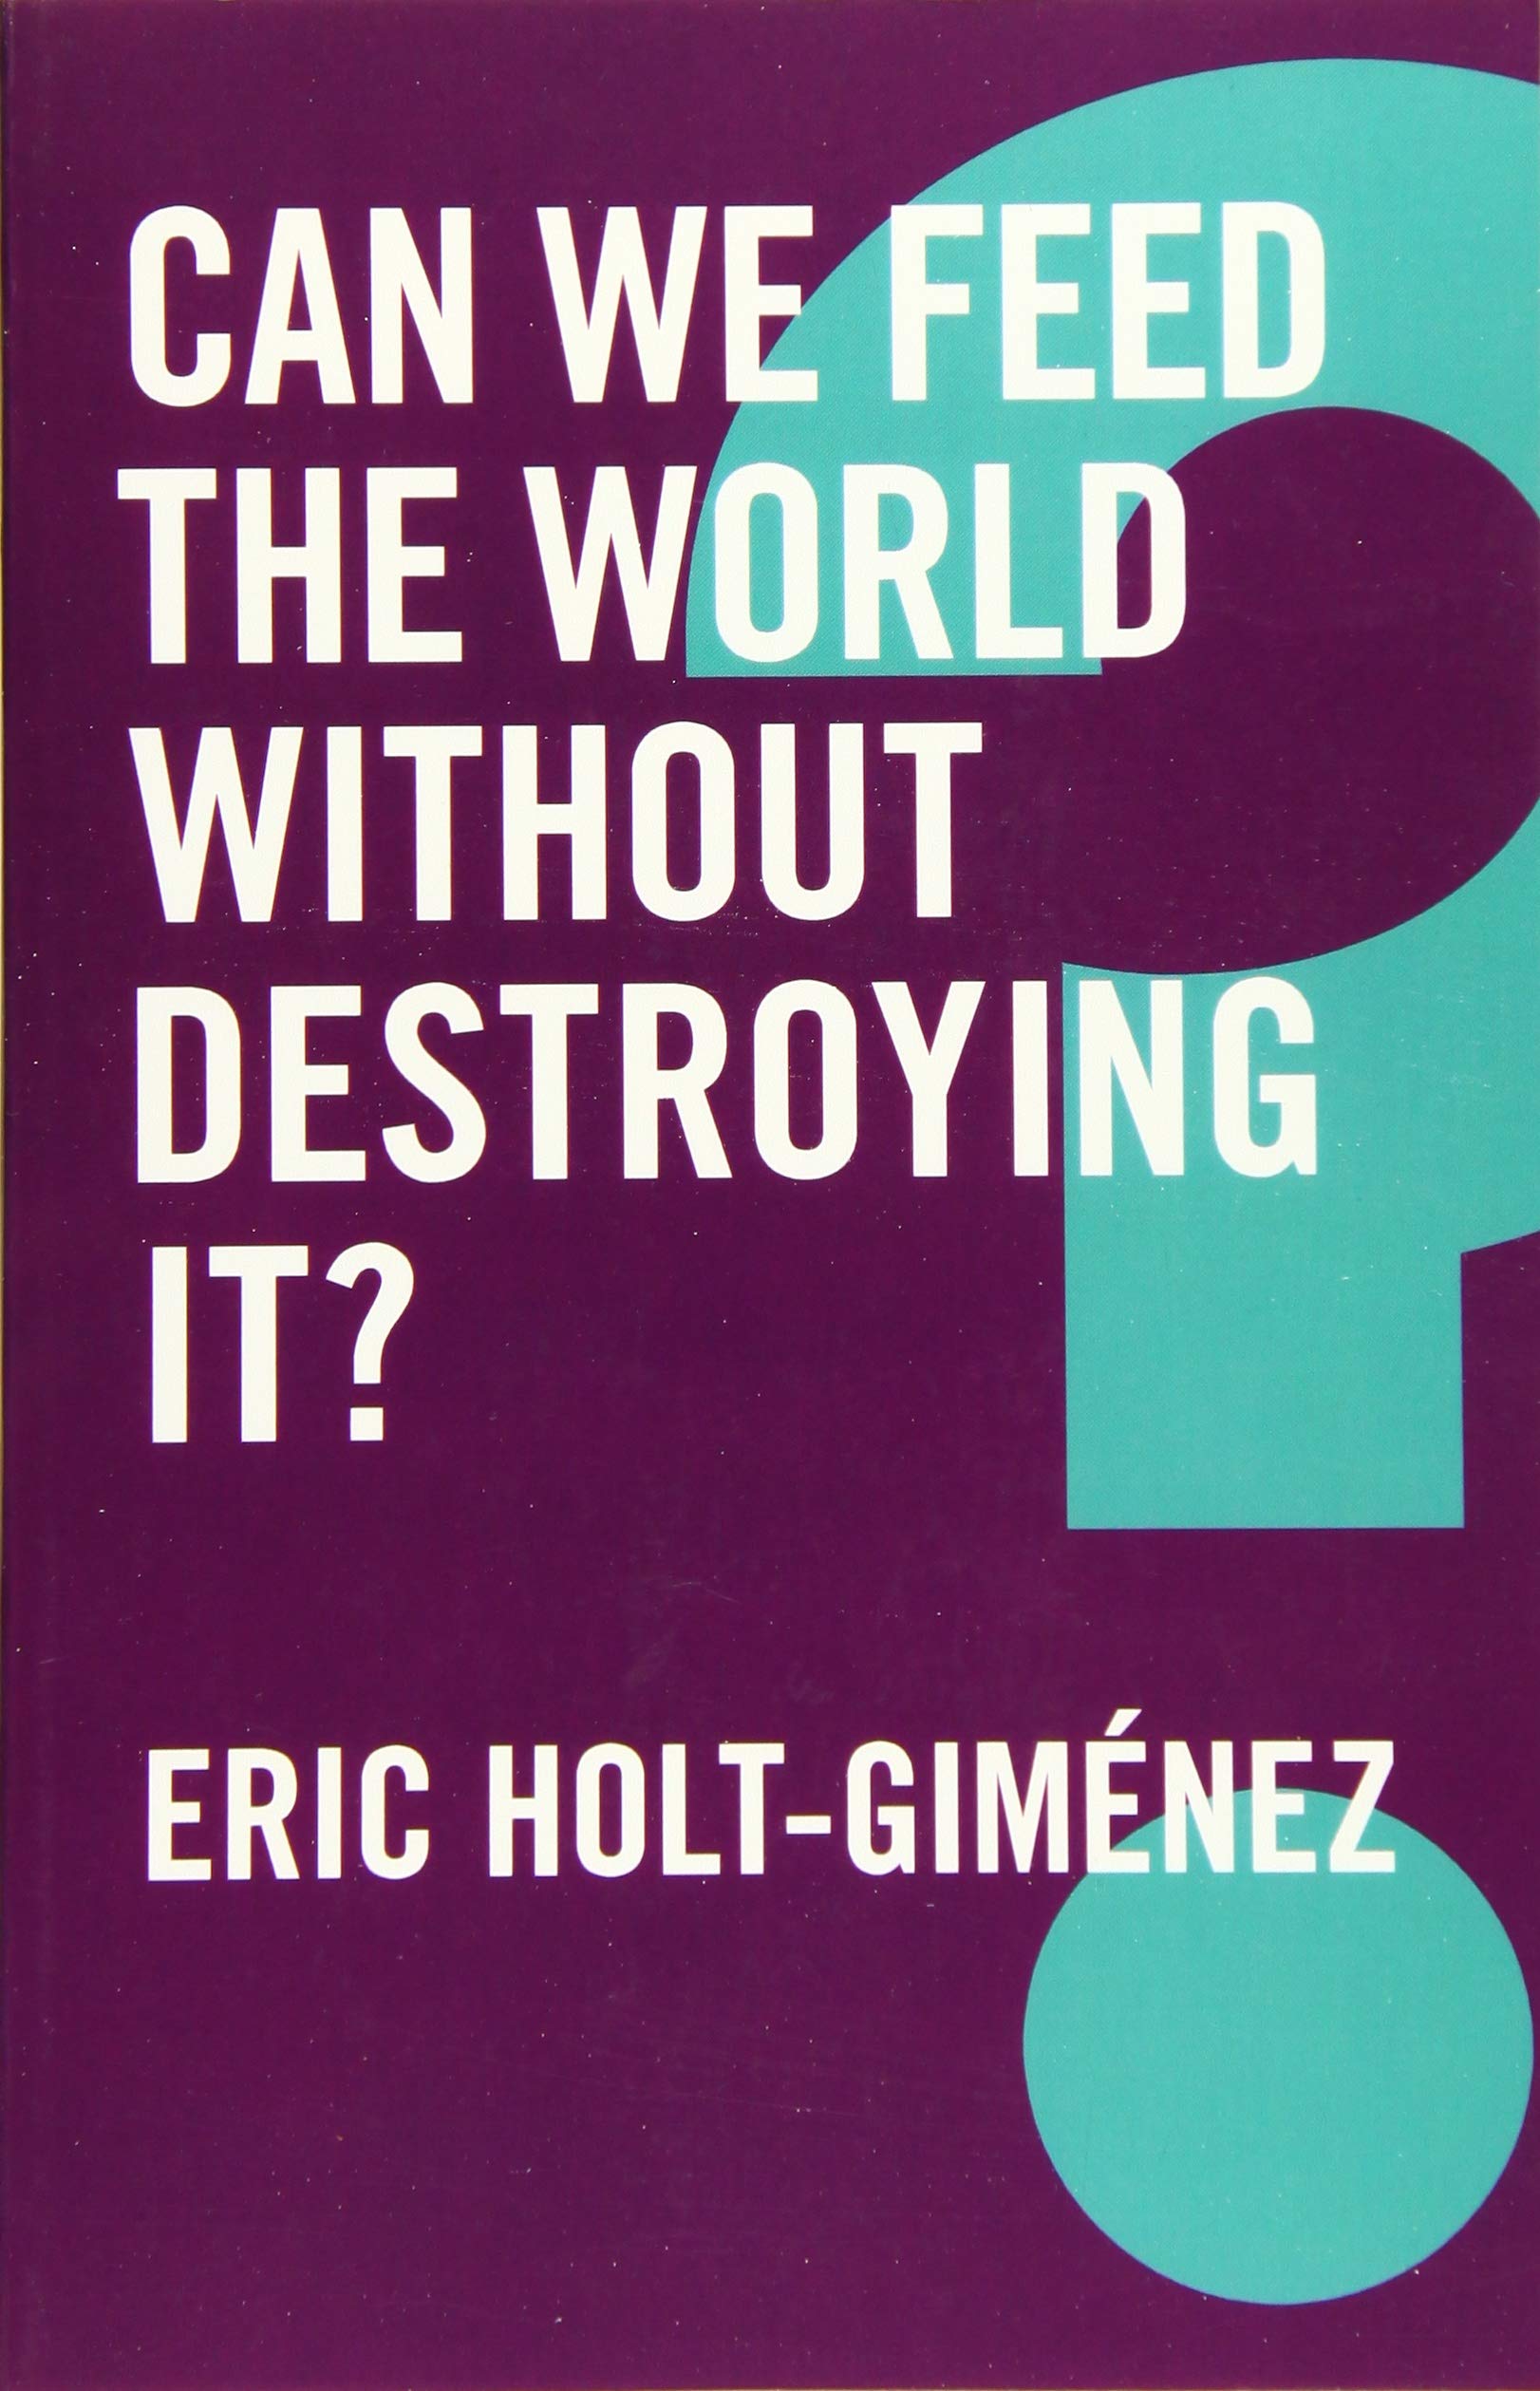 Can We Feed the World Without Destroying It? | Eric Holt-Gimenez